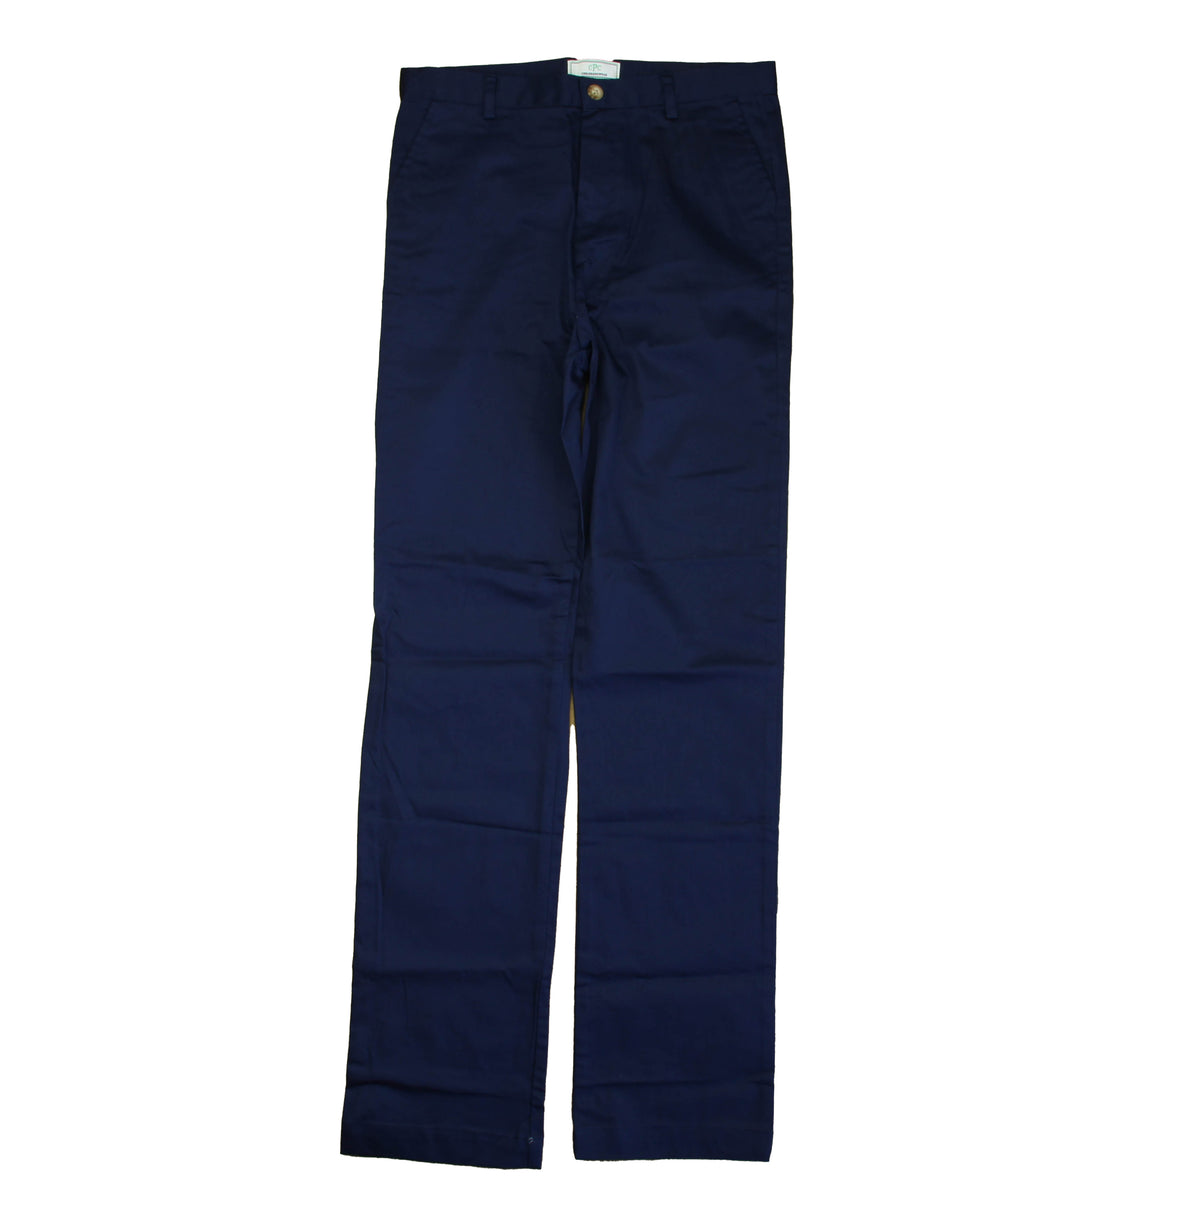 New with Tags: Medieval Blue Pants size: 6-14 Years -- FINAL SALE